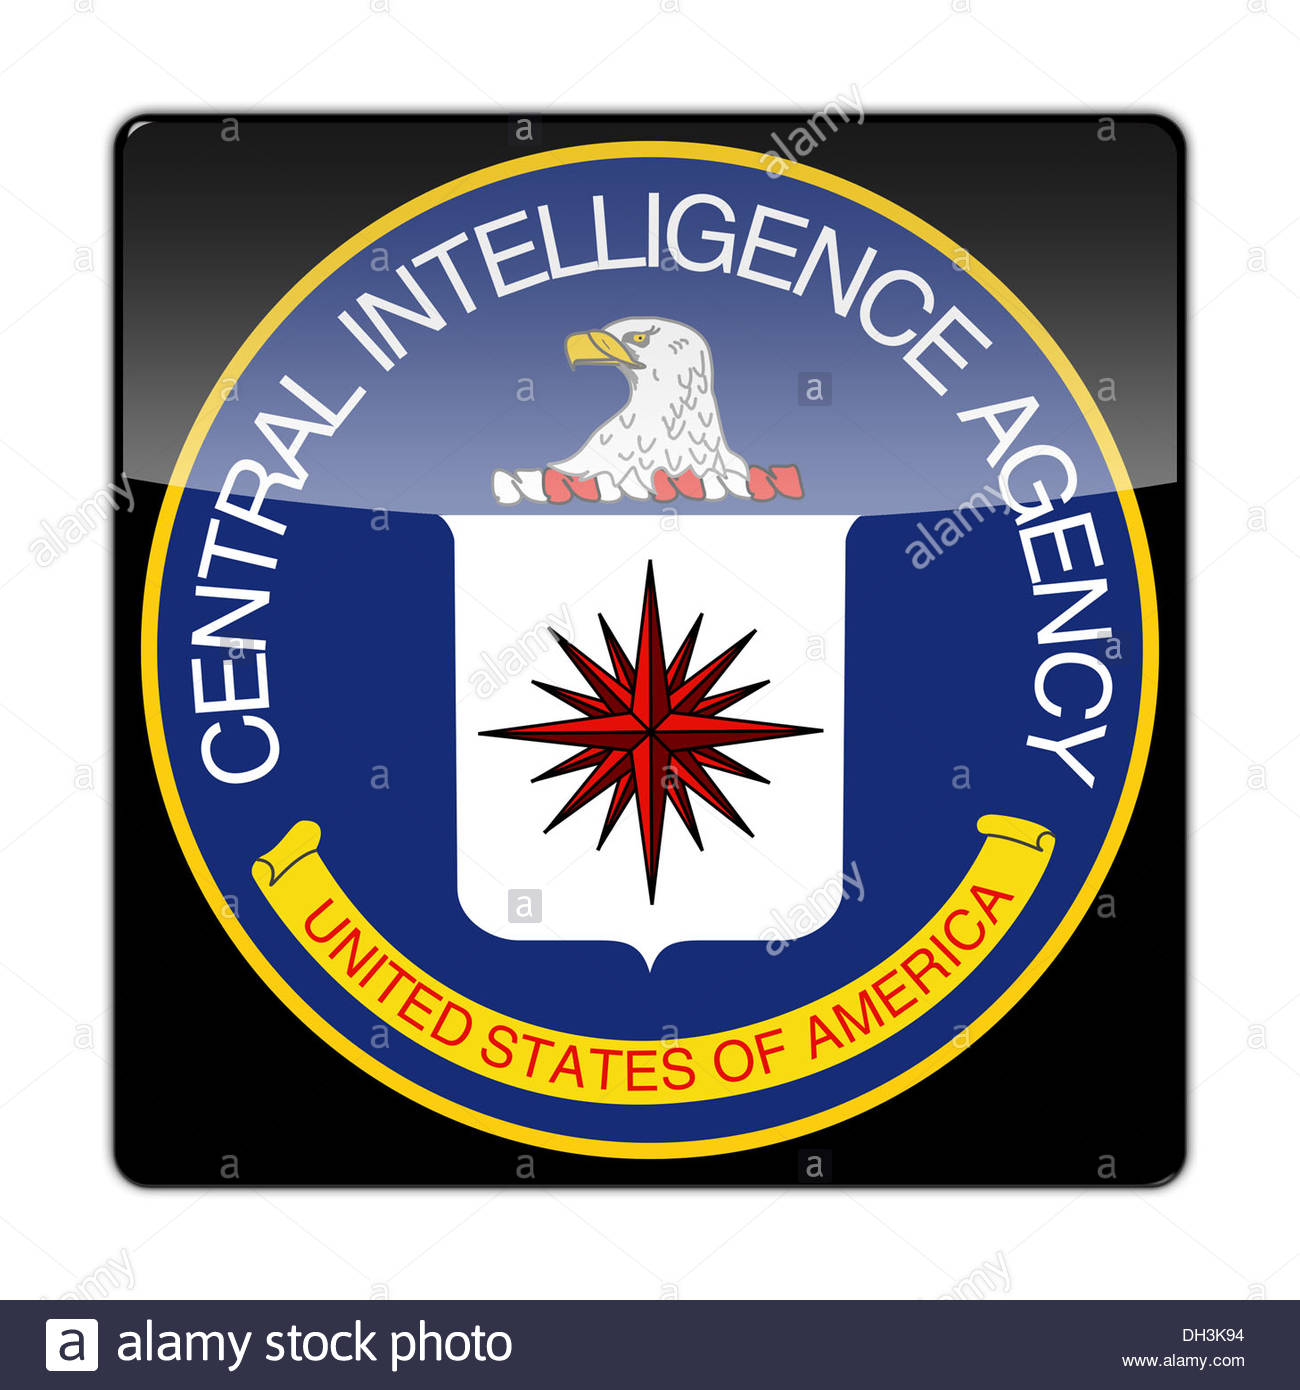 central-intelligence-agency-icon-cia-seal-stock-photo-62161264-alamy